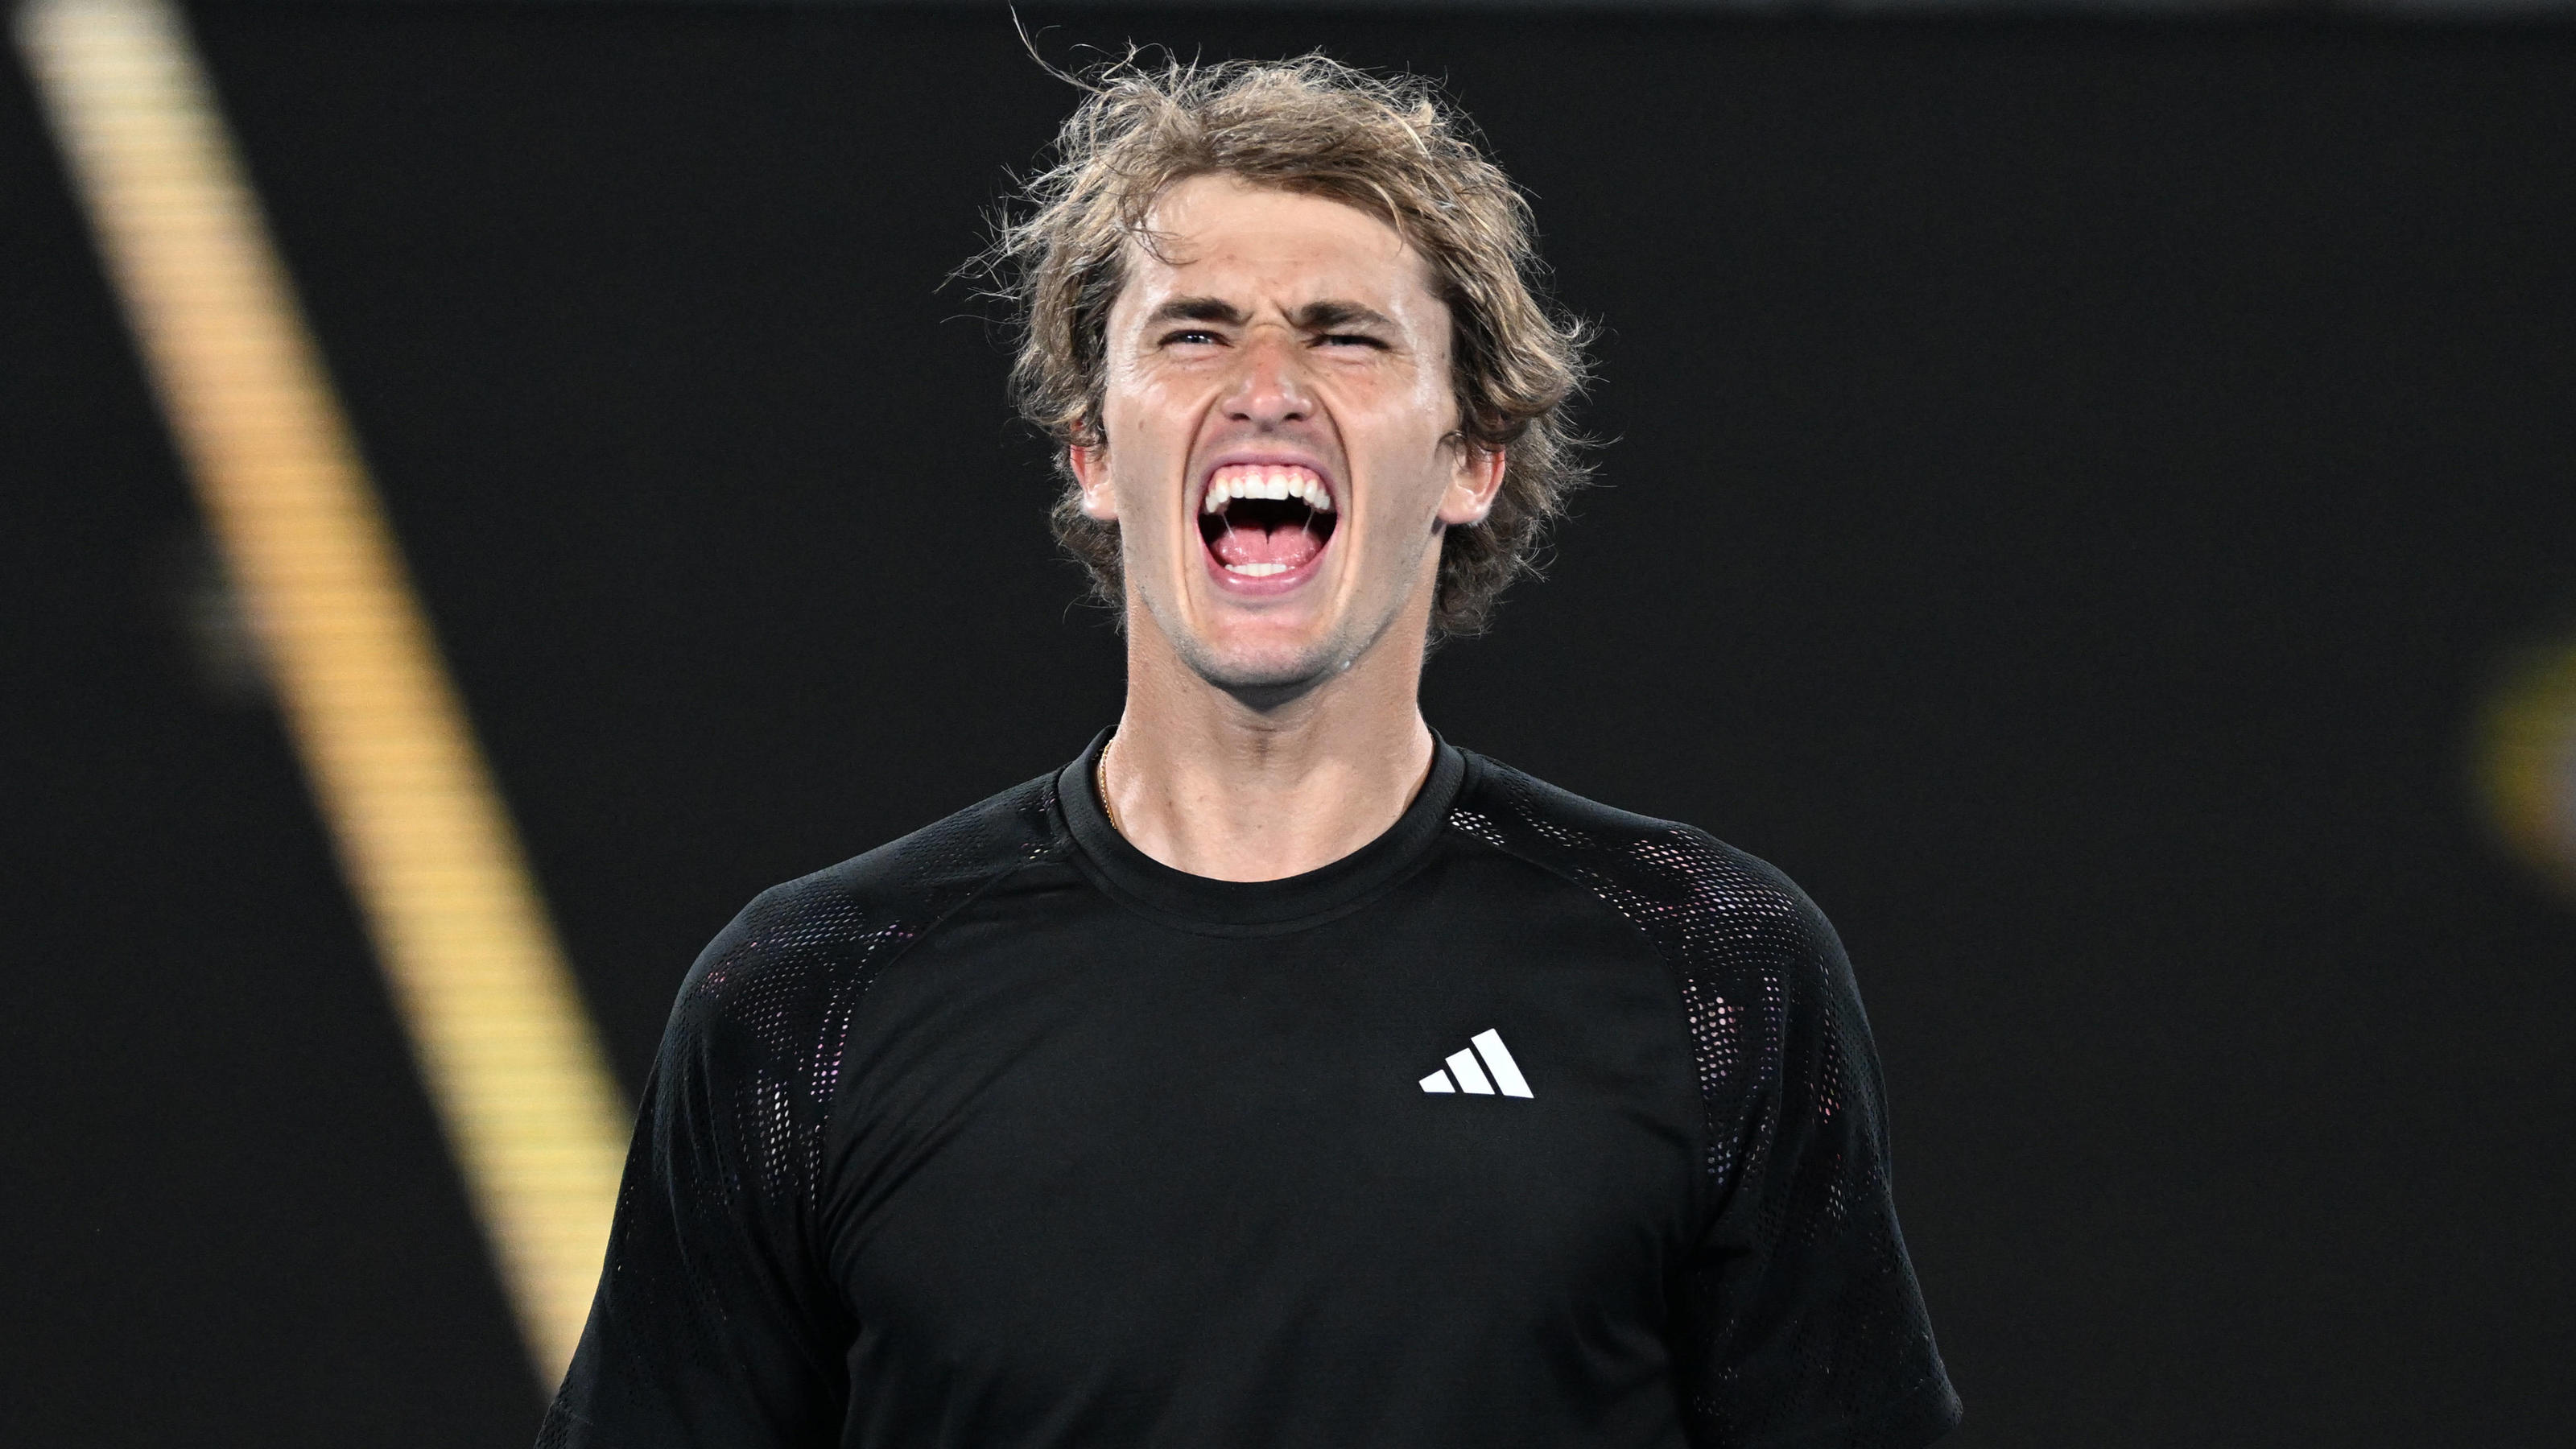 TENNIS AUSTRALIAN OPEN, Alexander Zverev of Germany celebrates winning his first round match against Juan Pablo Varillas of Peru at the 2023 Australian Open tennis tournament at Melbourne Park in Melbourne, Tuesday, January 17, 2023.  ACHTUNG: NUR RE